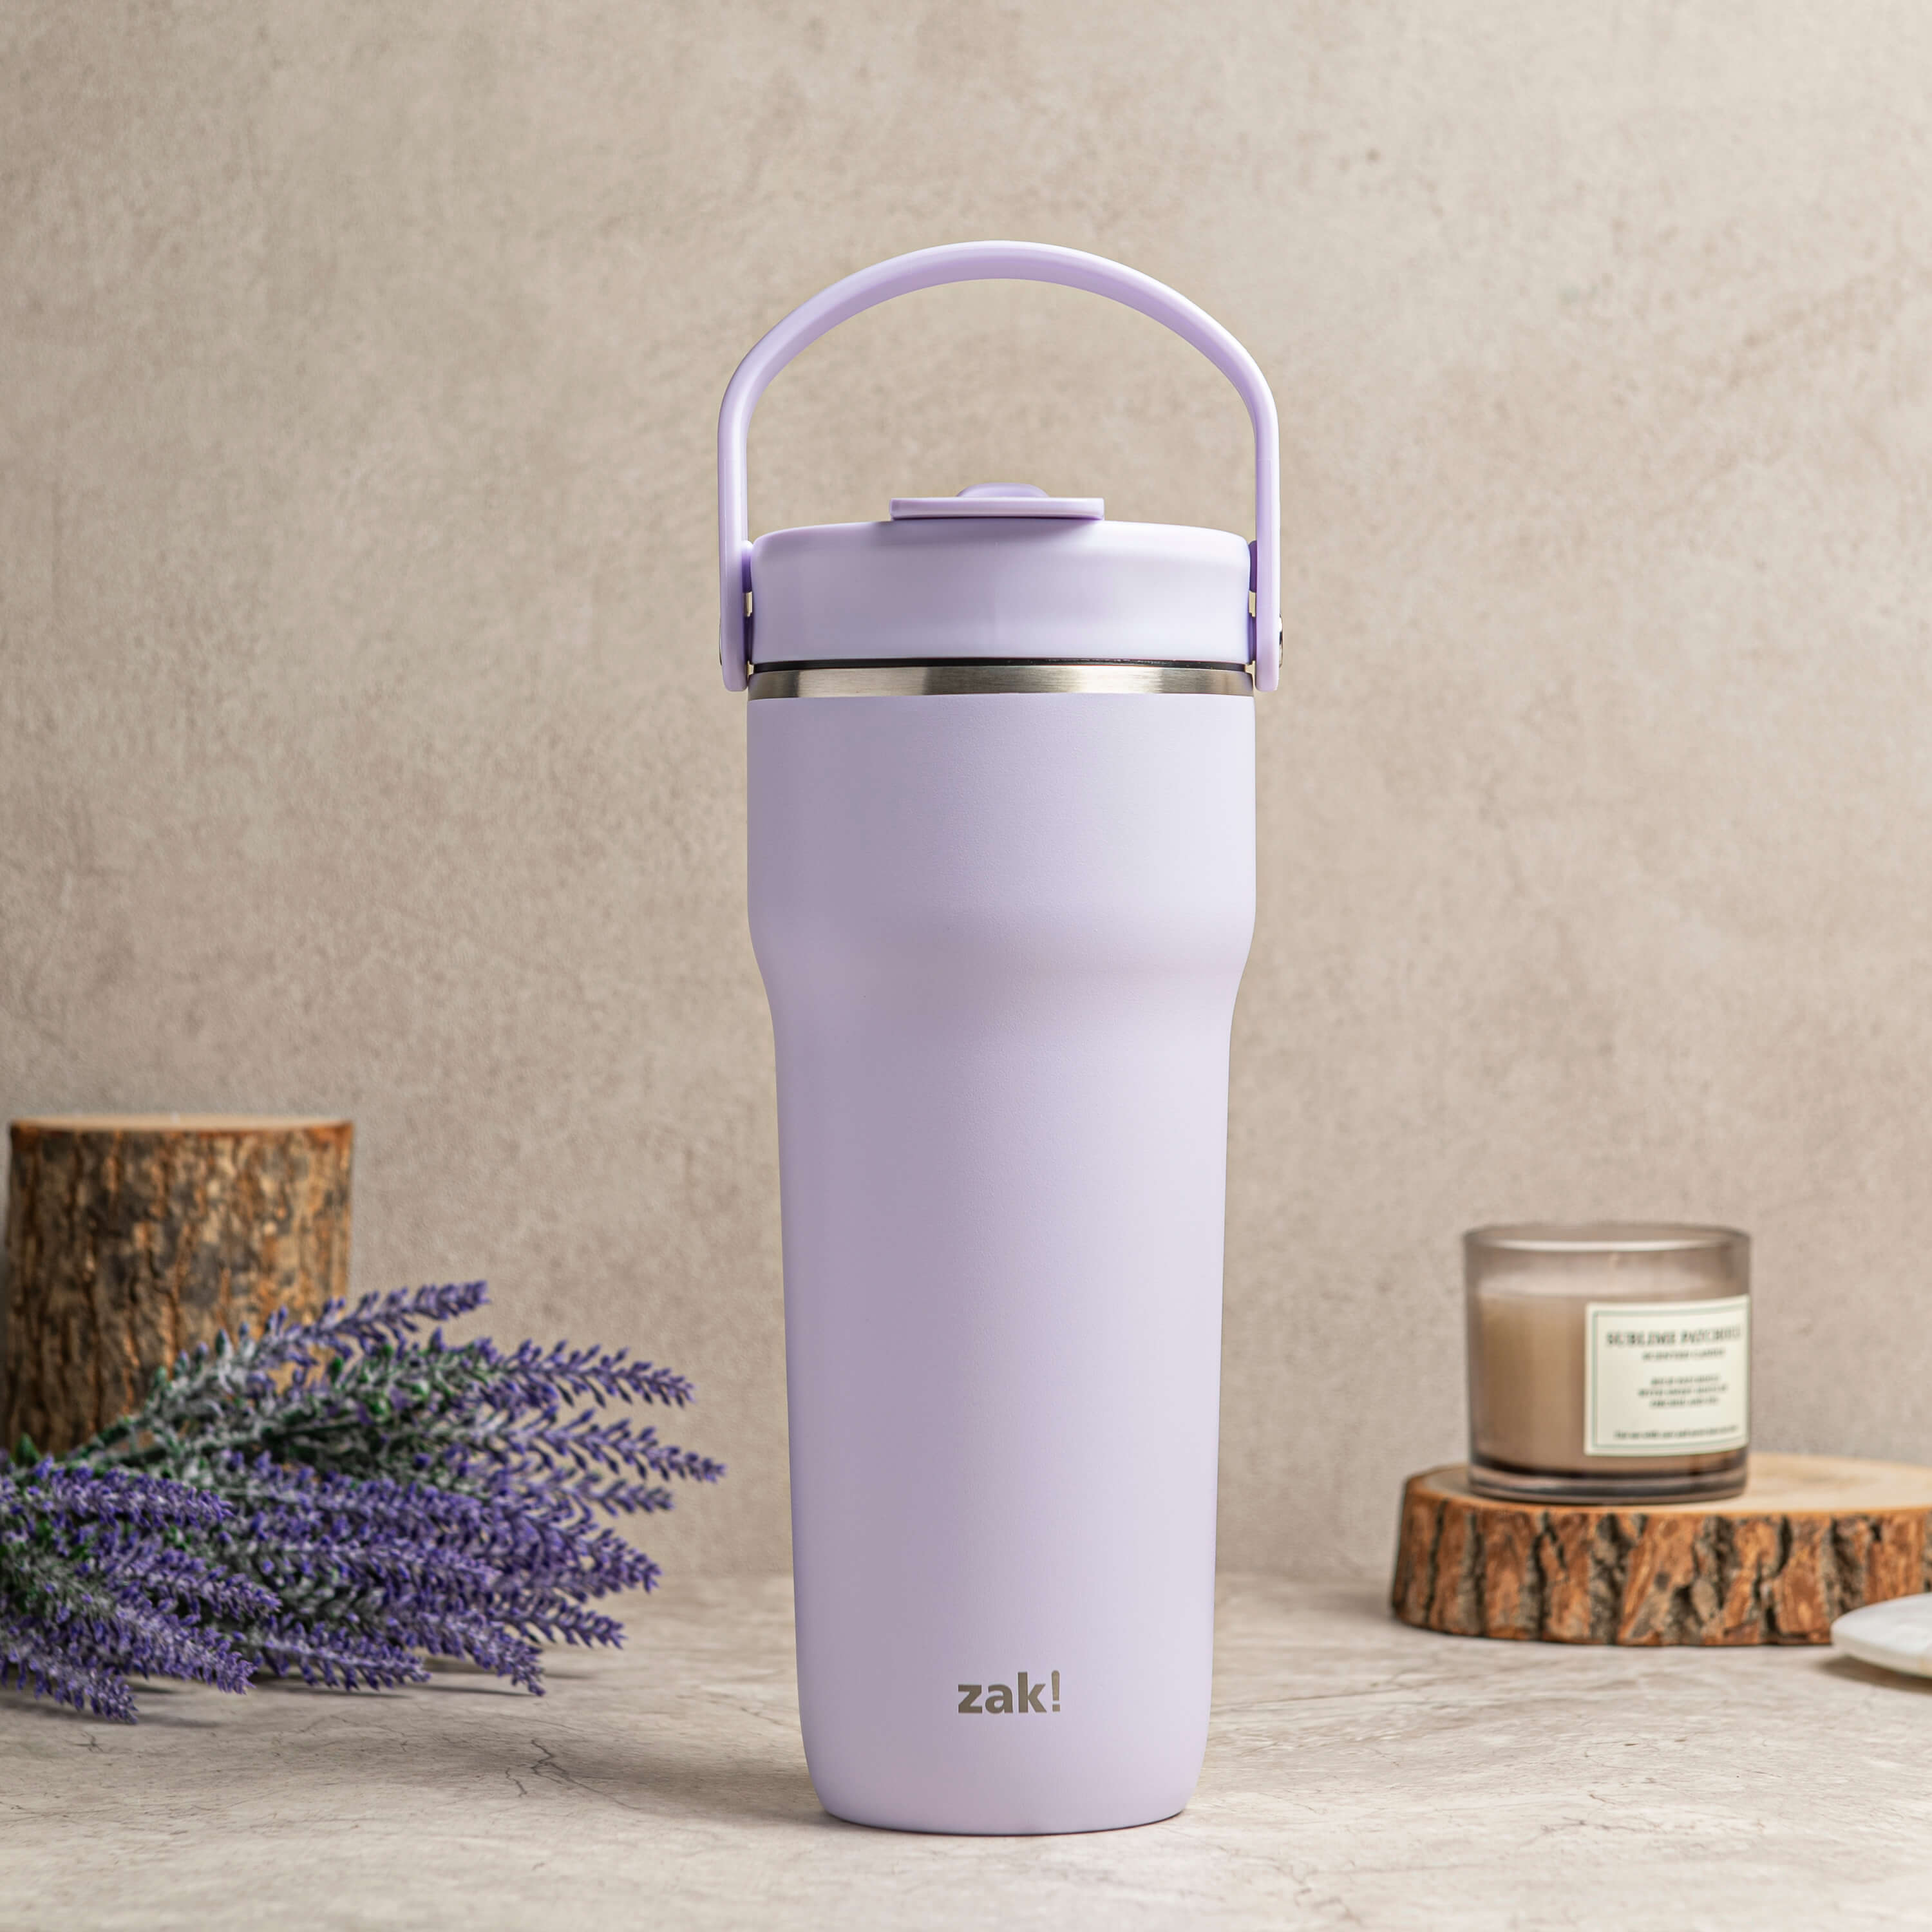 Harmony Recycled Stainless Steel Insulated Hot & Cold Tumbler - Smoky Lilac, 30 ounces